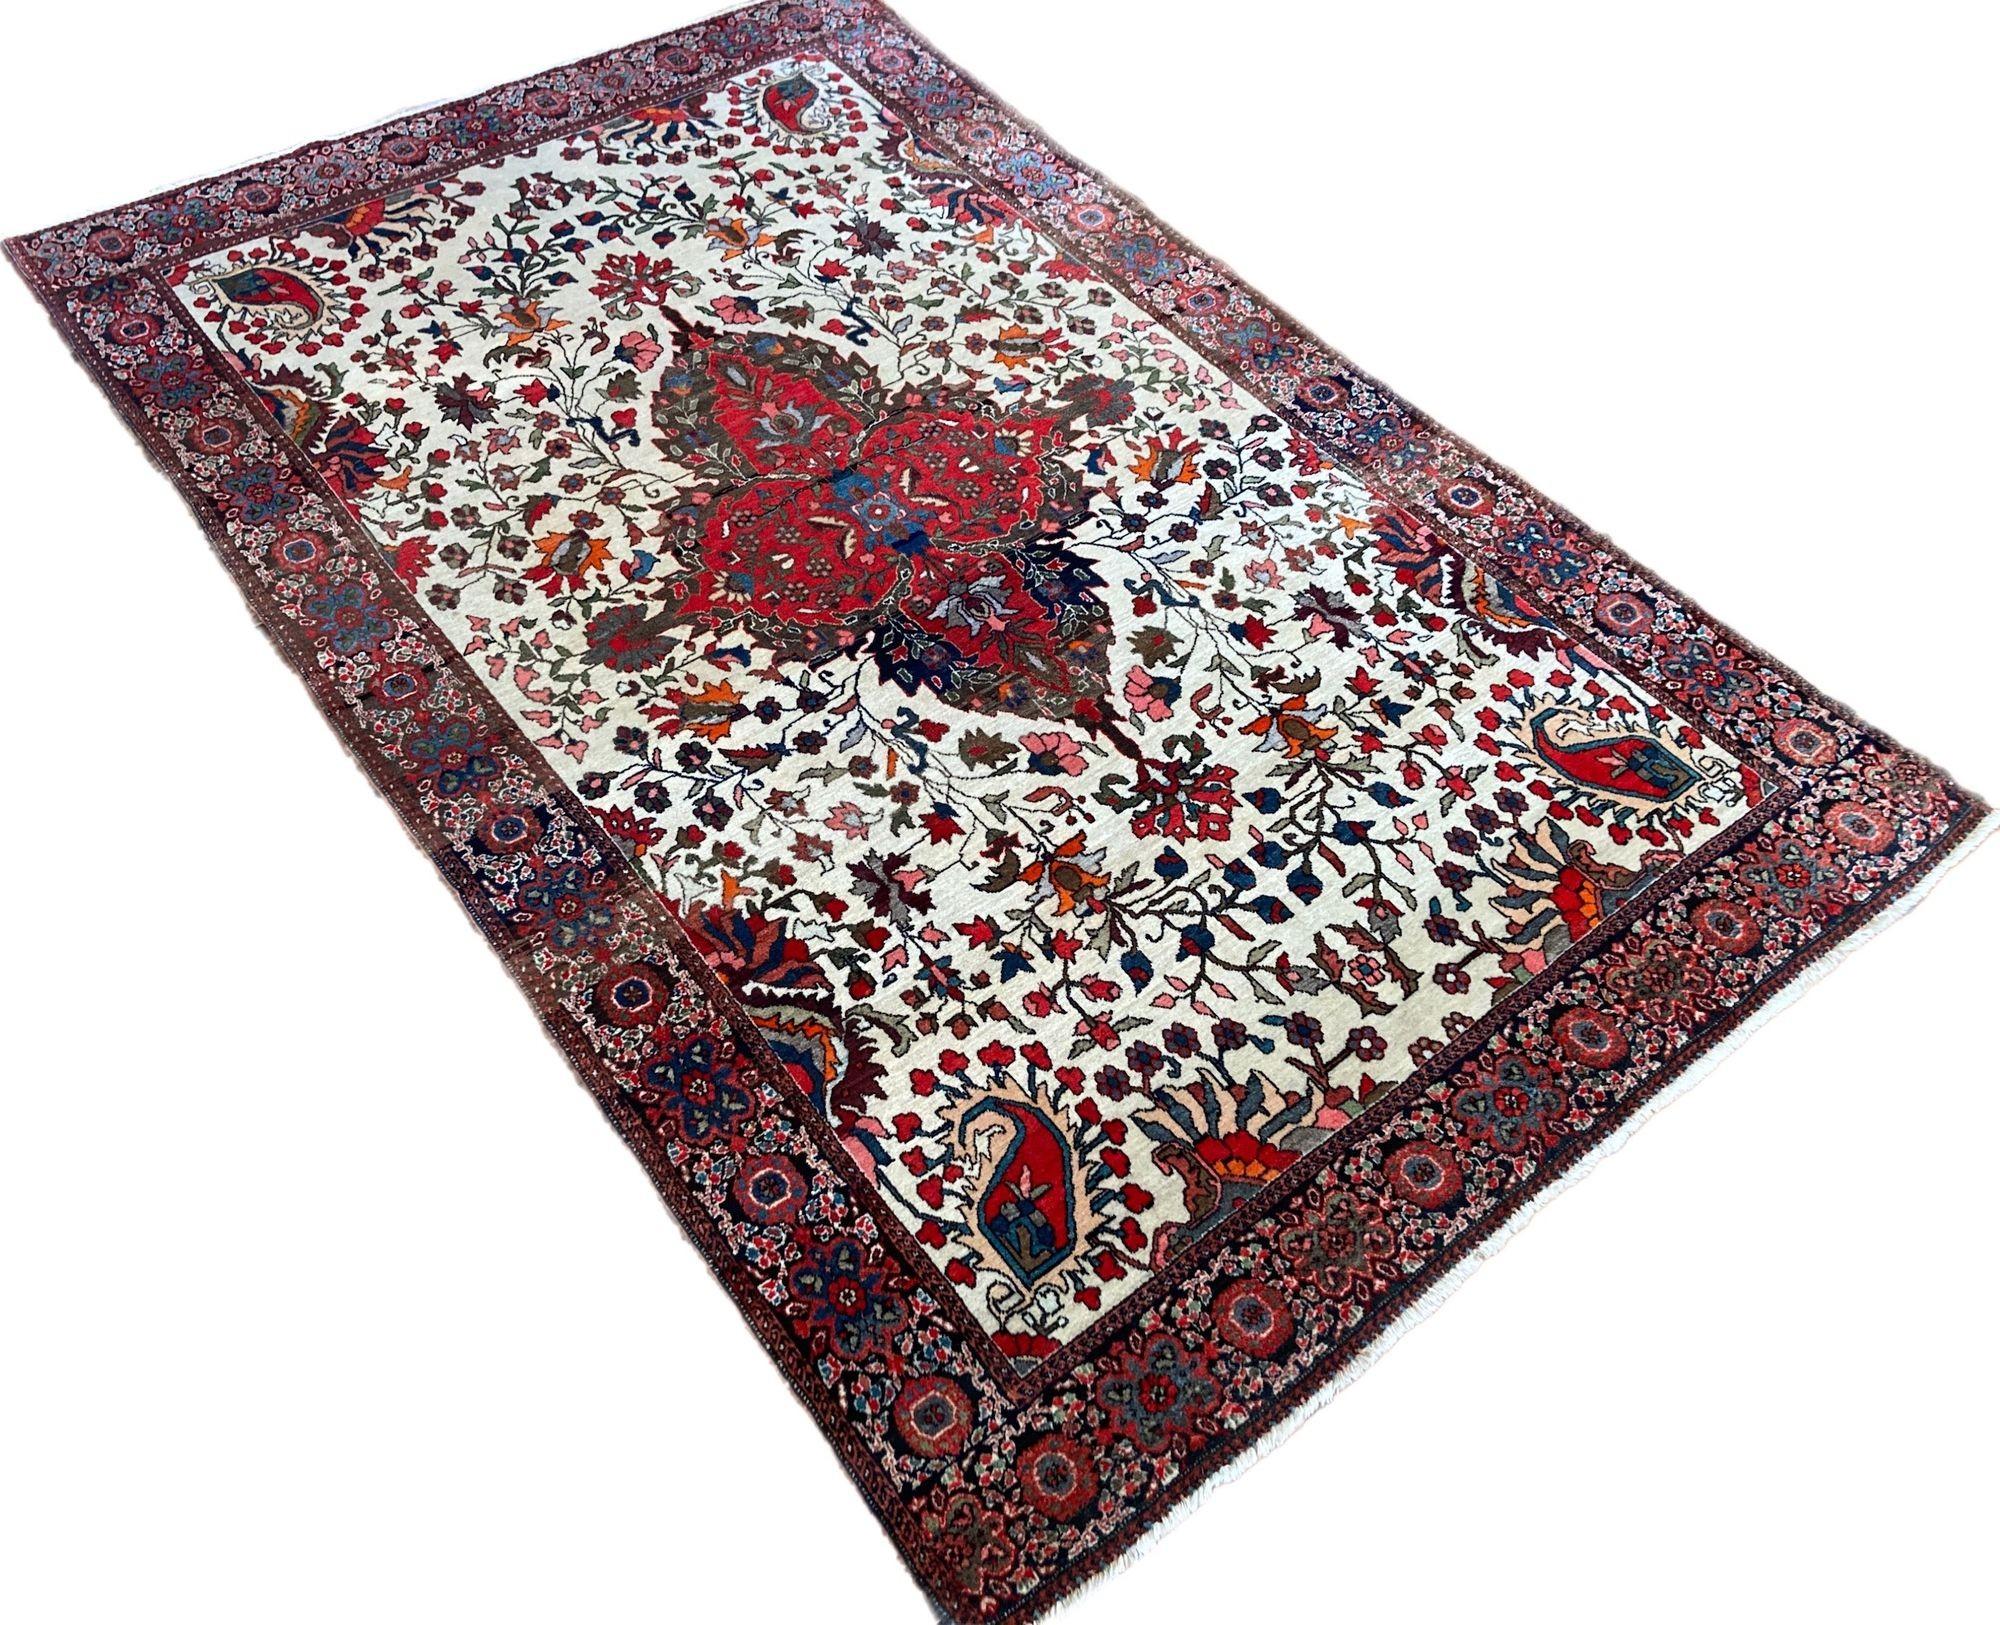 Antique Sarouk Rug 1.98m X 1.27m In Good Condition For Sale In St. Albans, GB